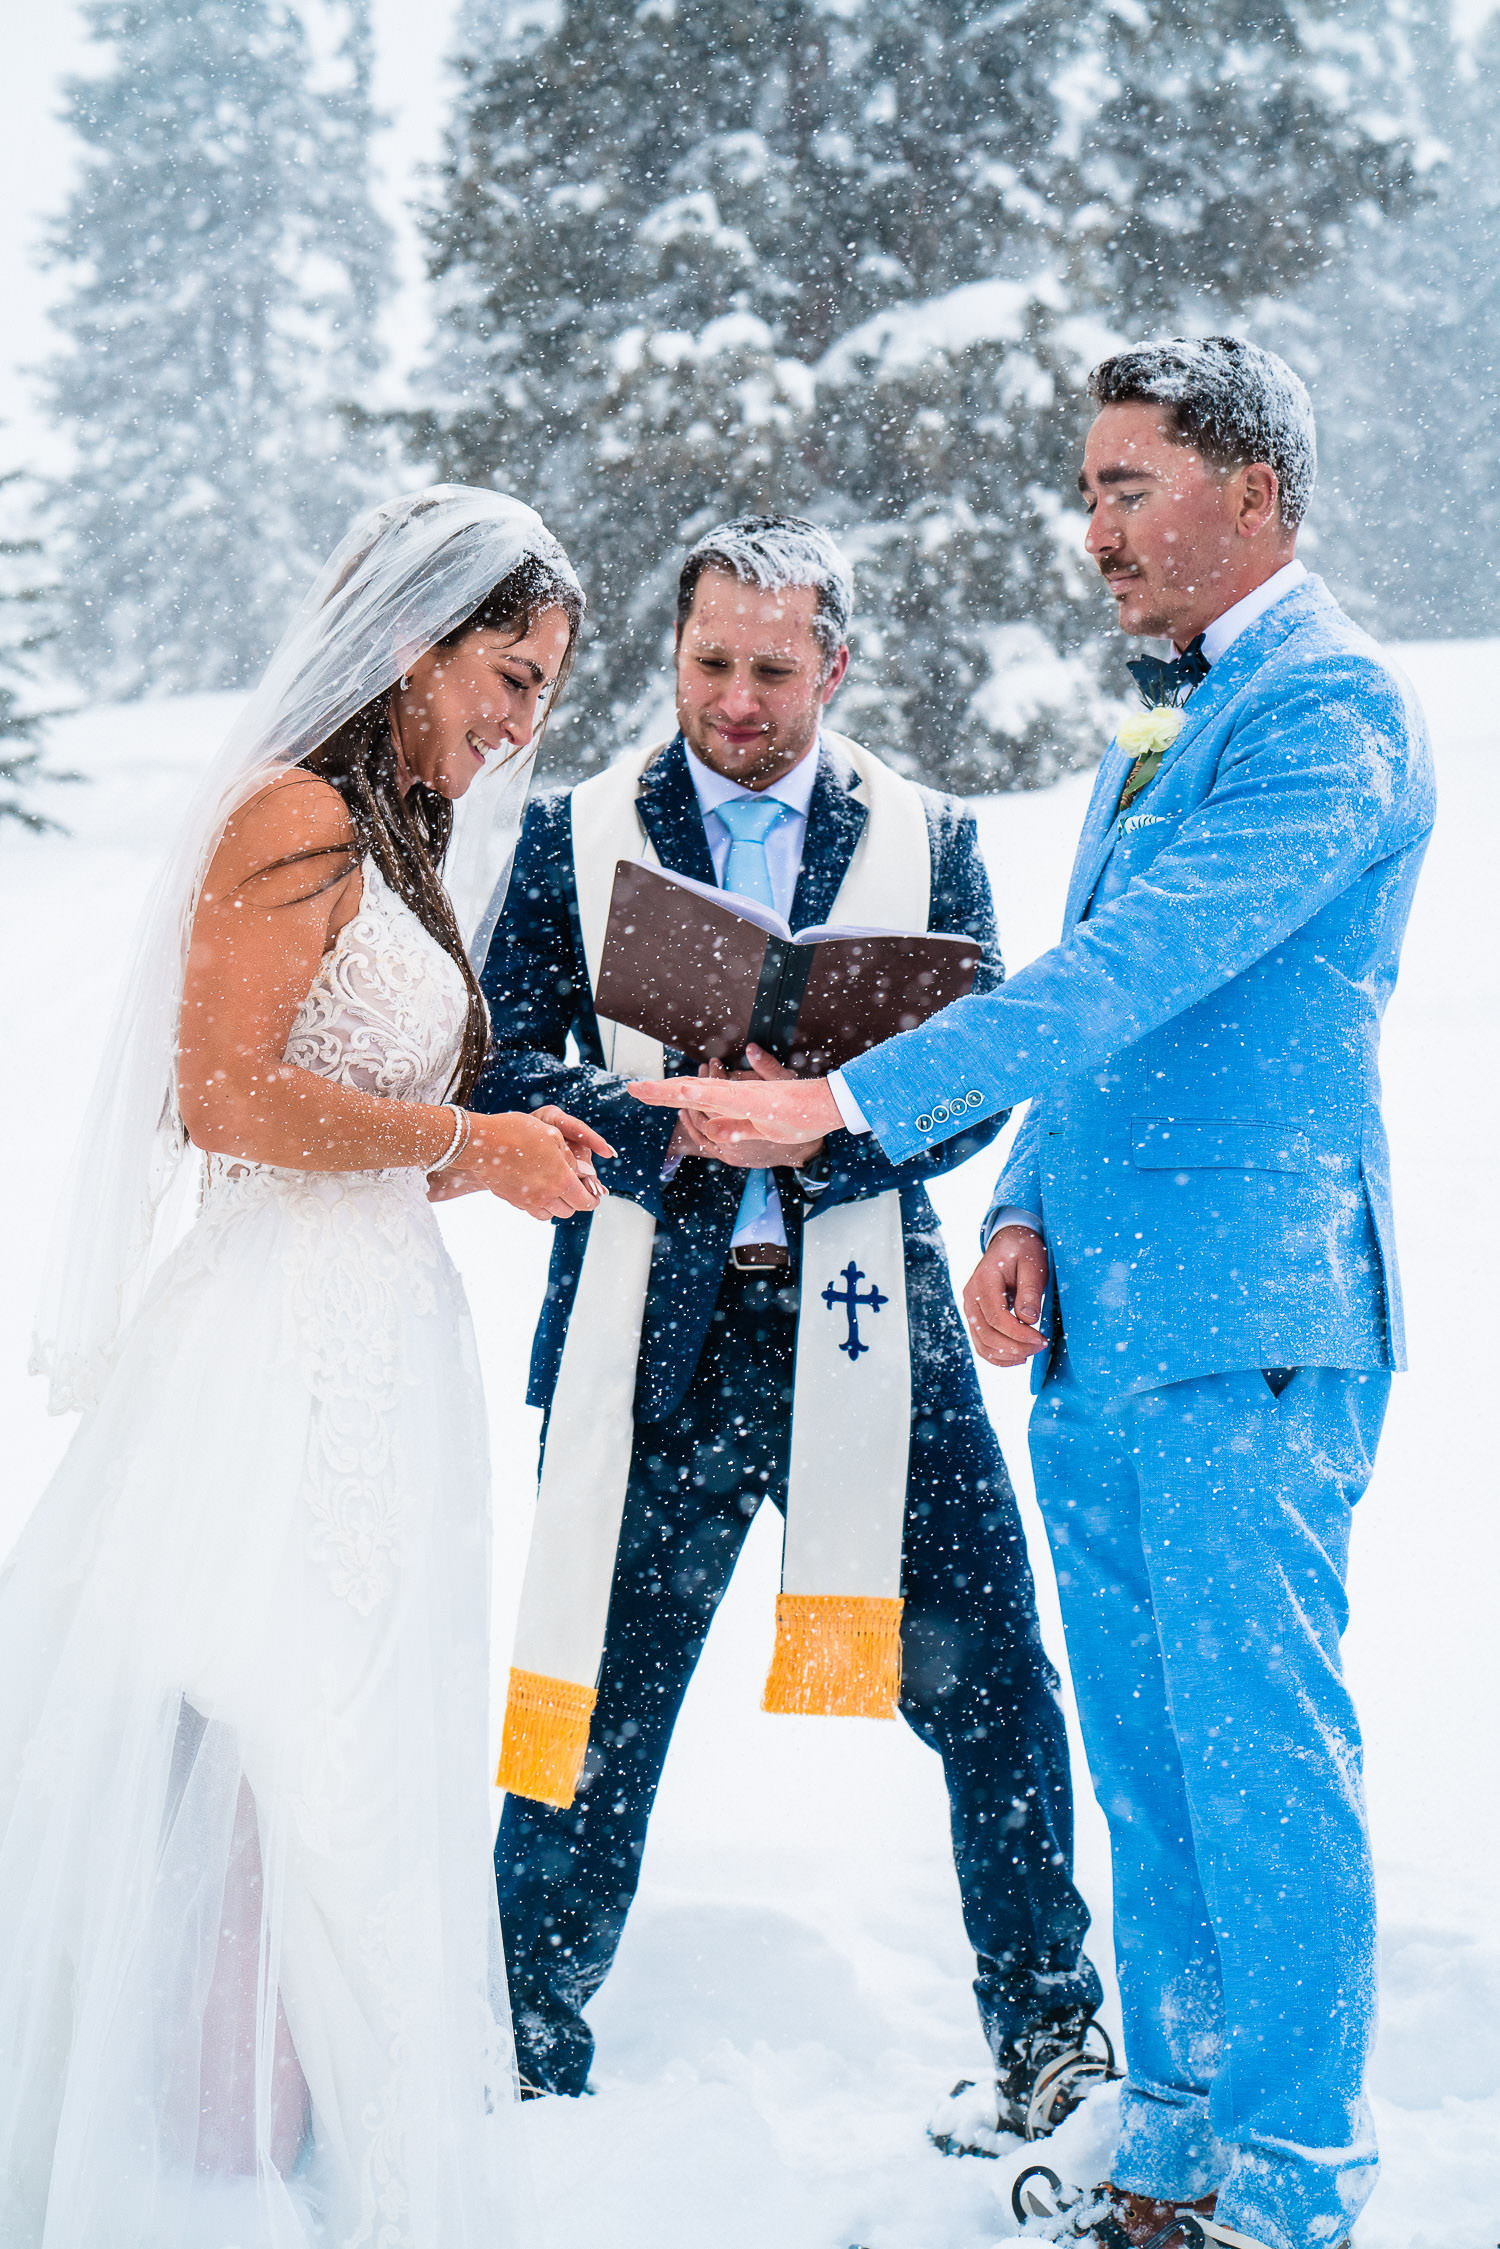 How to Write an Elopement Ceremony